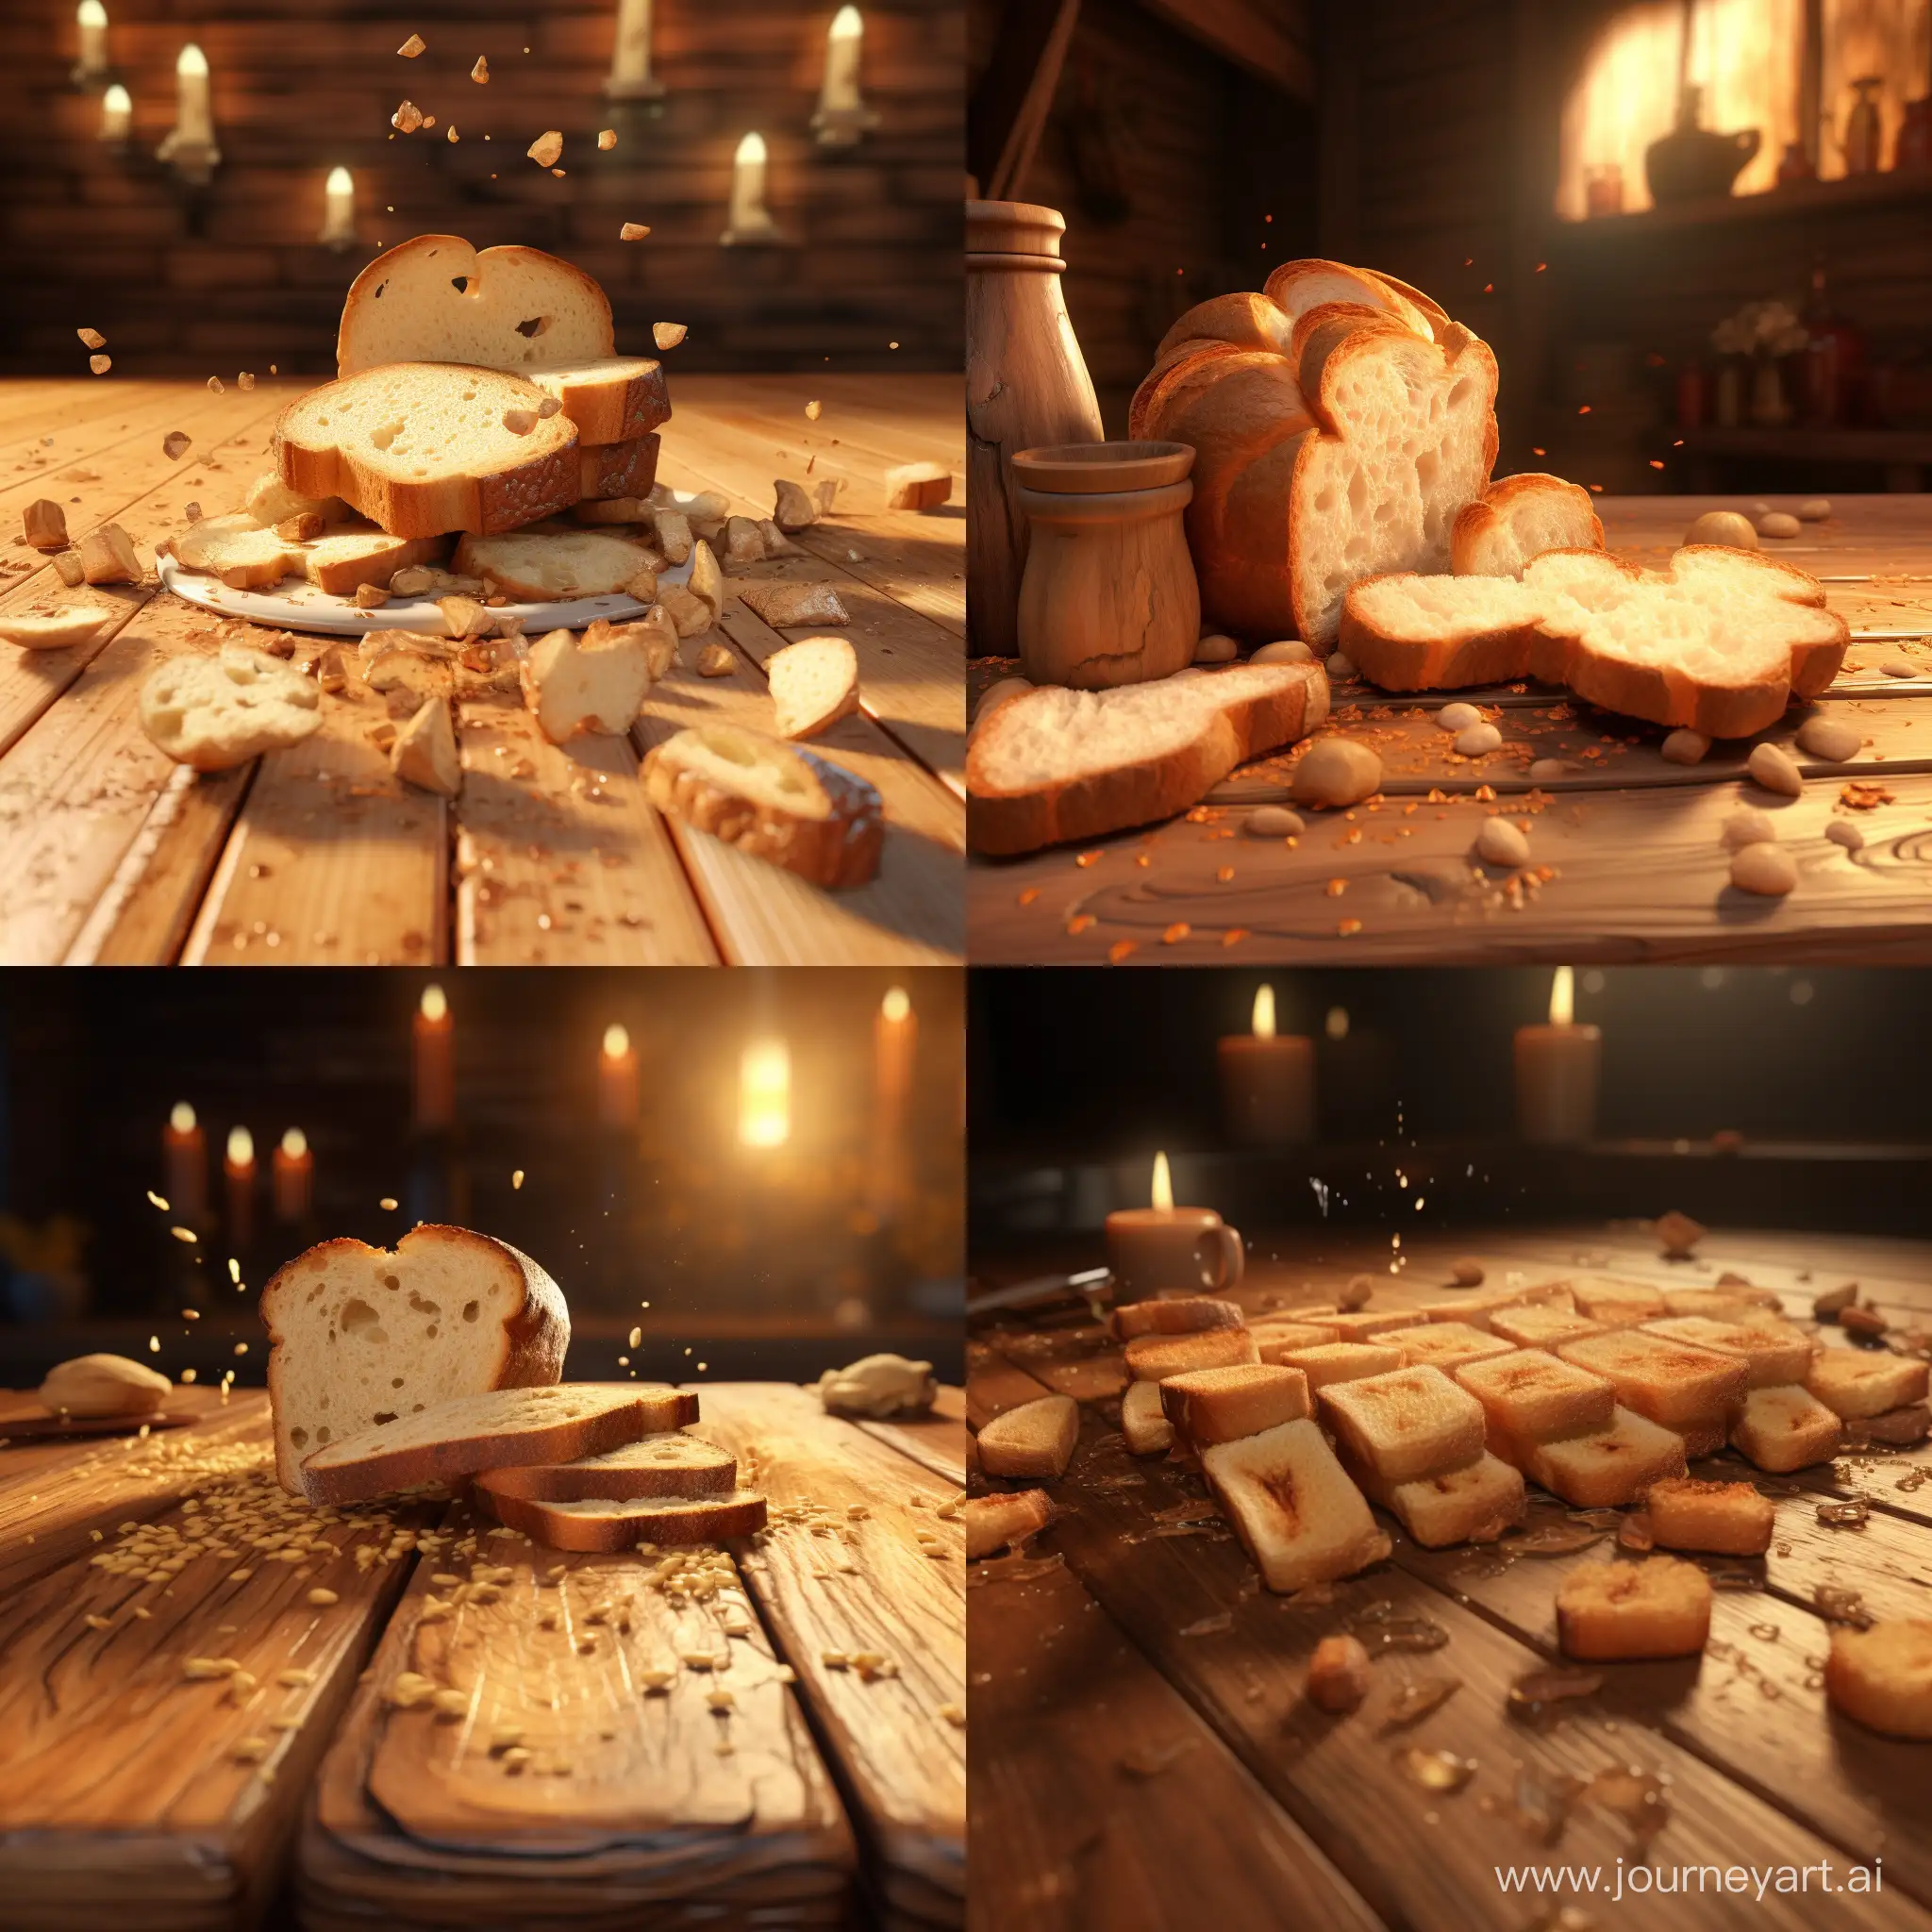 Whimsical-3D-Animation-Big-Crumbs-of-Bread-on-the-Table